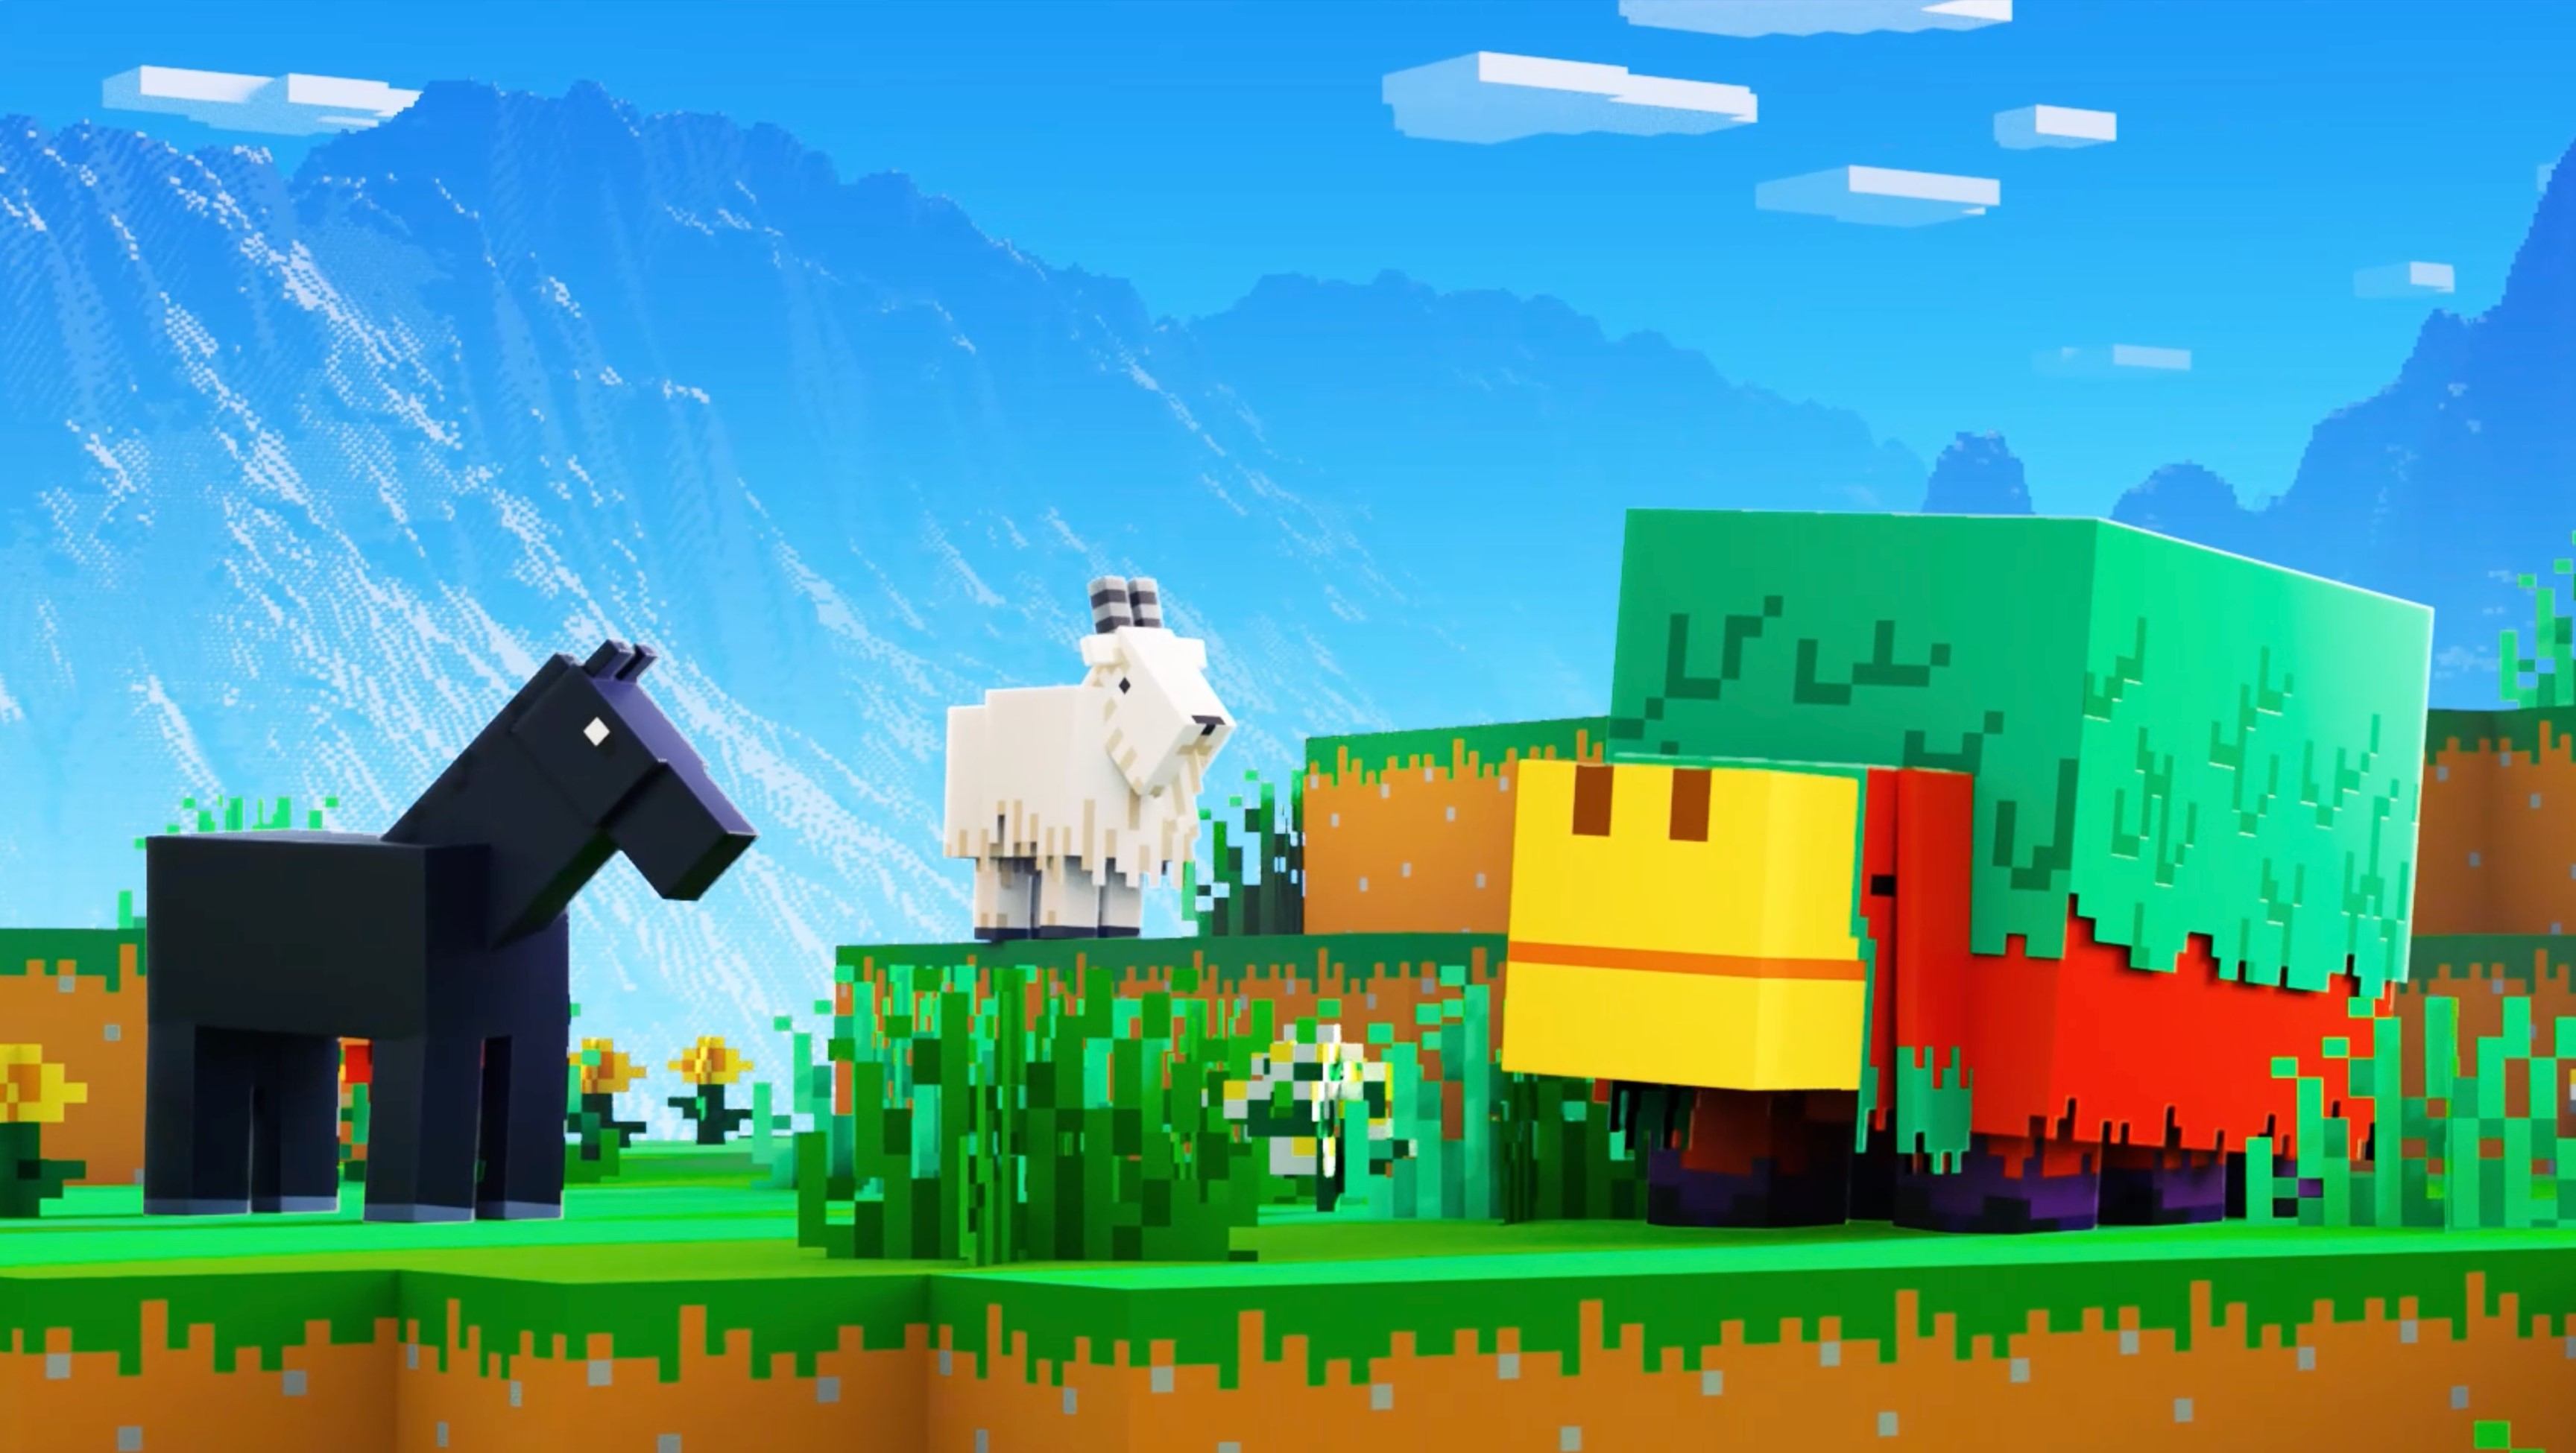 As Minecraft crosses 300 million copies, here are 5 fun facts about the  most popular game on Earth